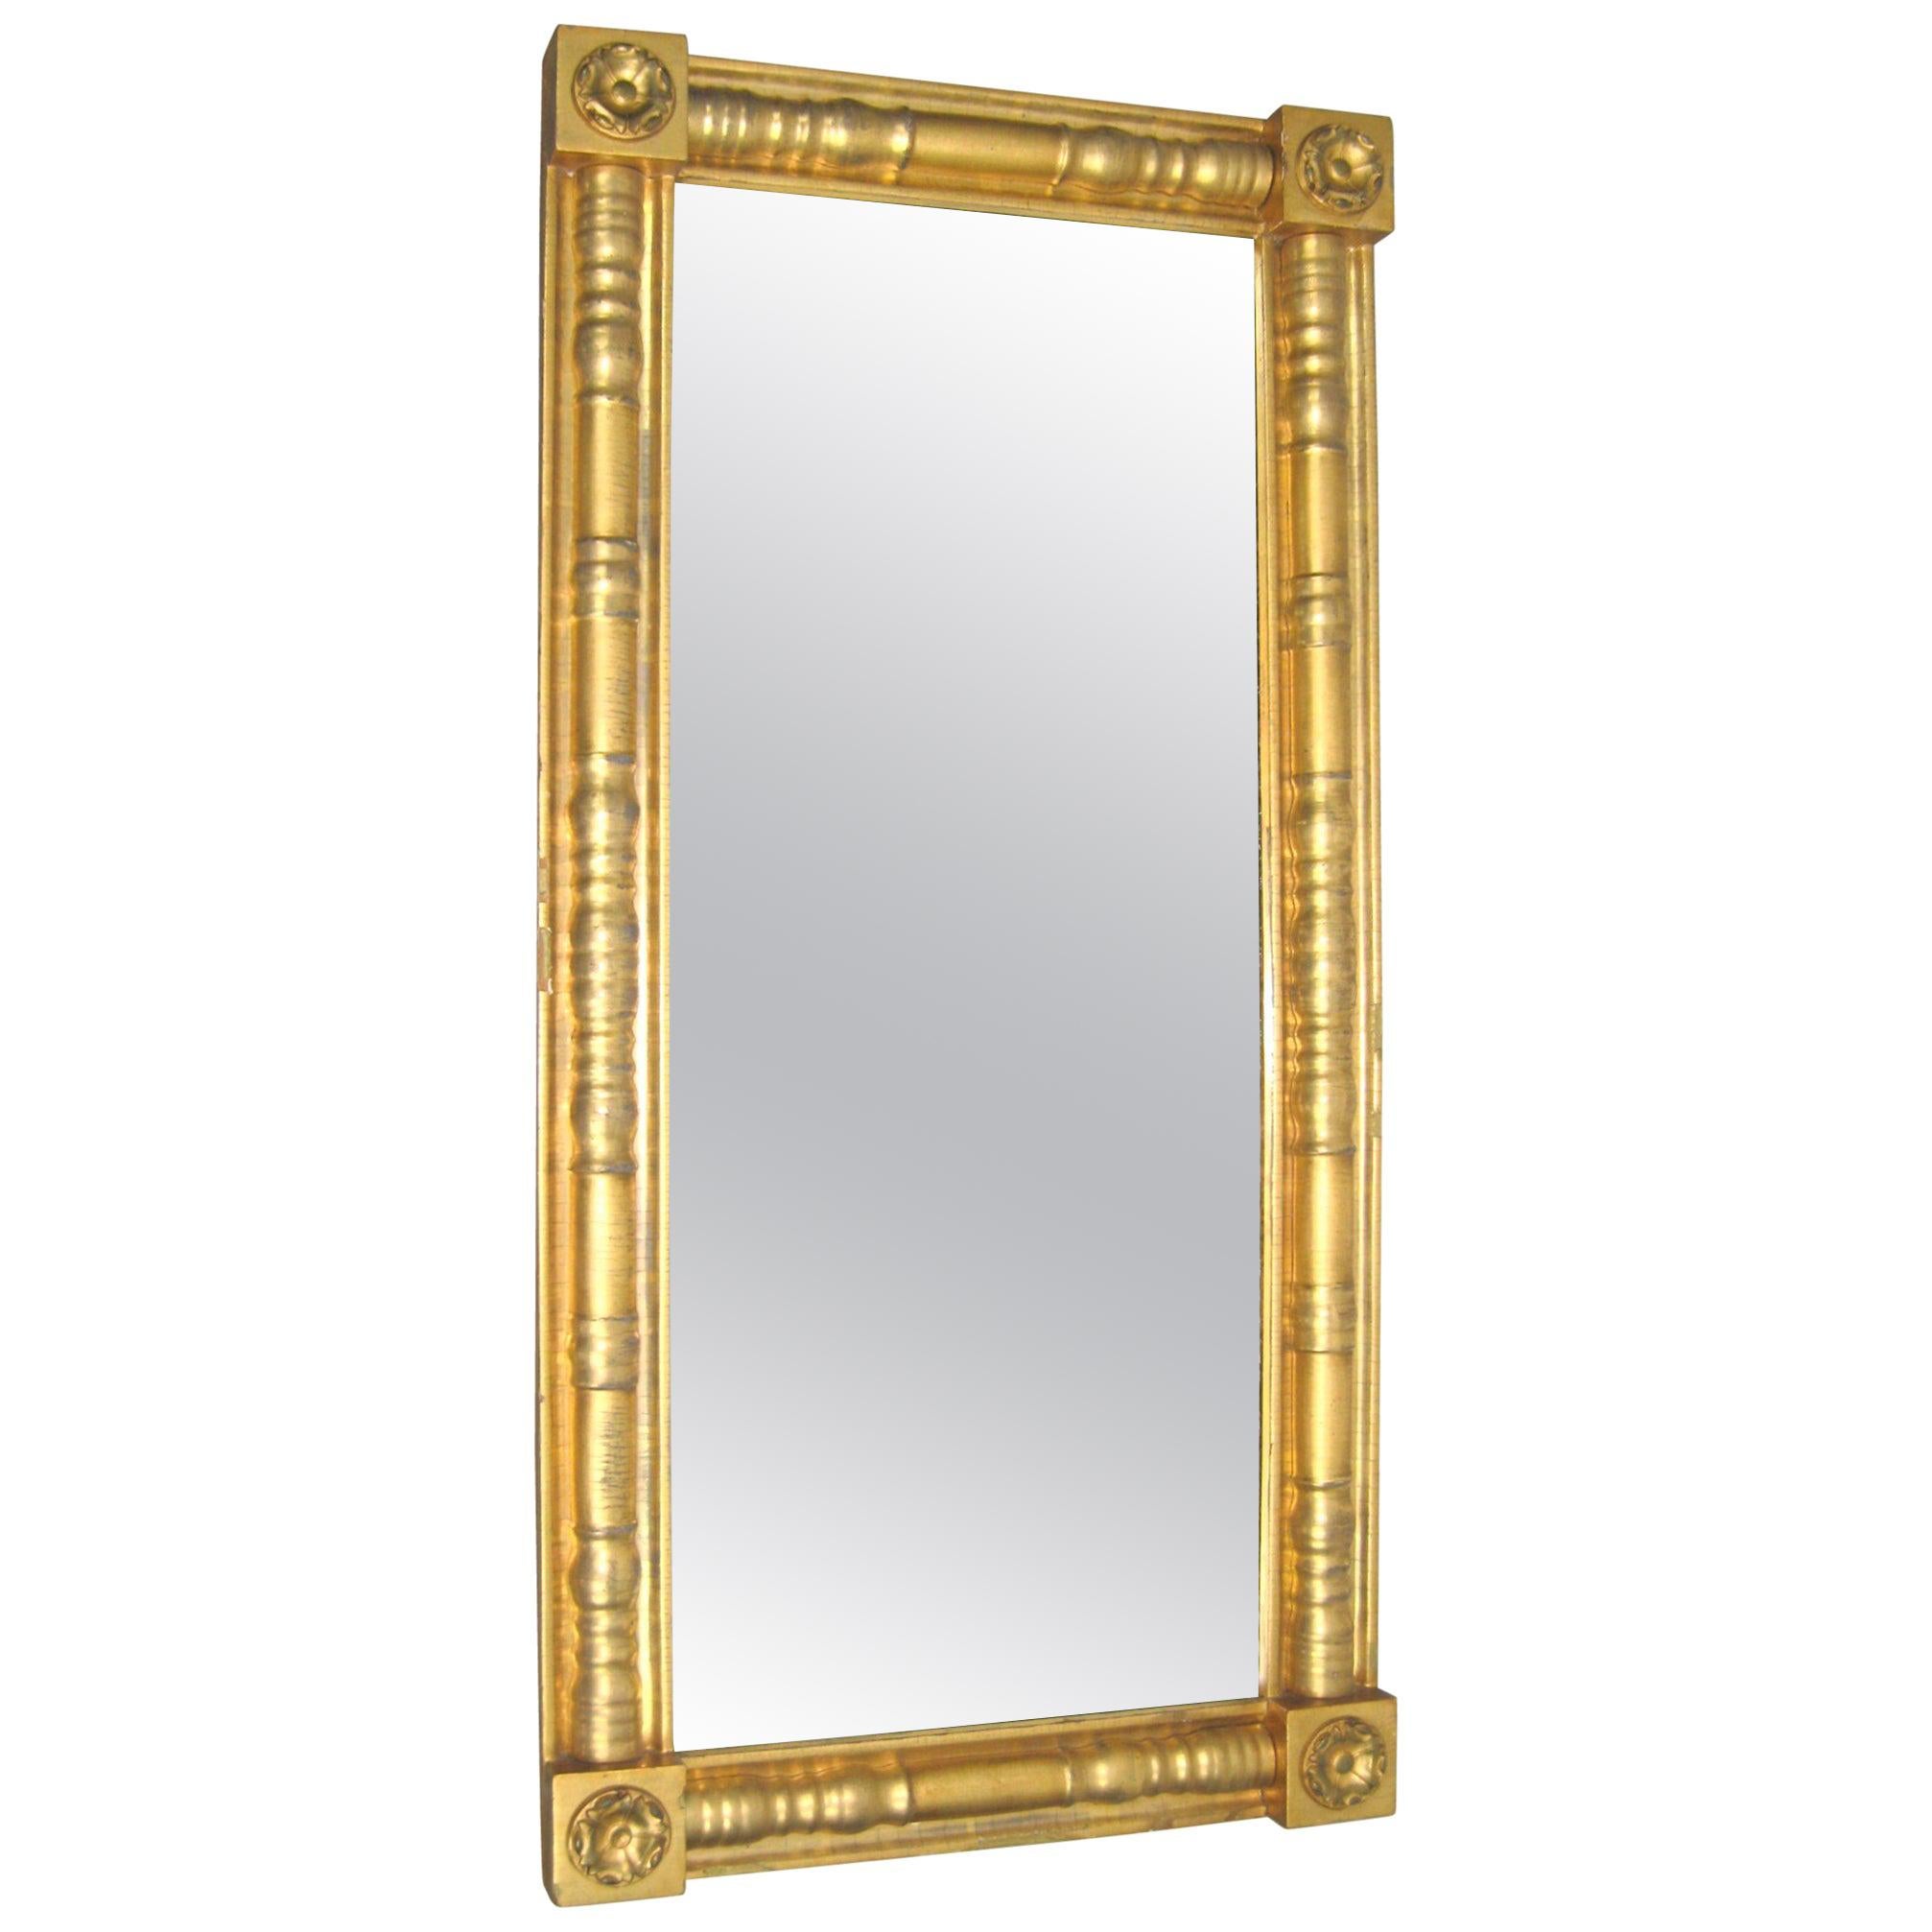  Neoclassical Gold Gilt Mantle Mirror